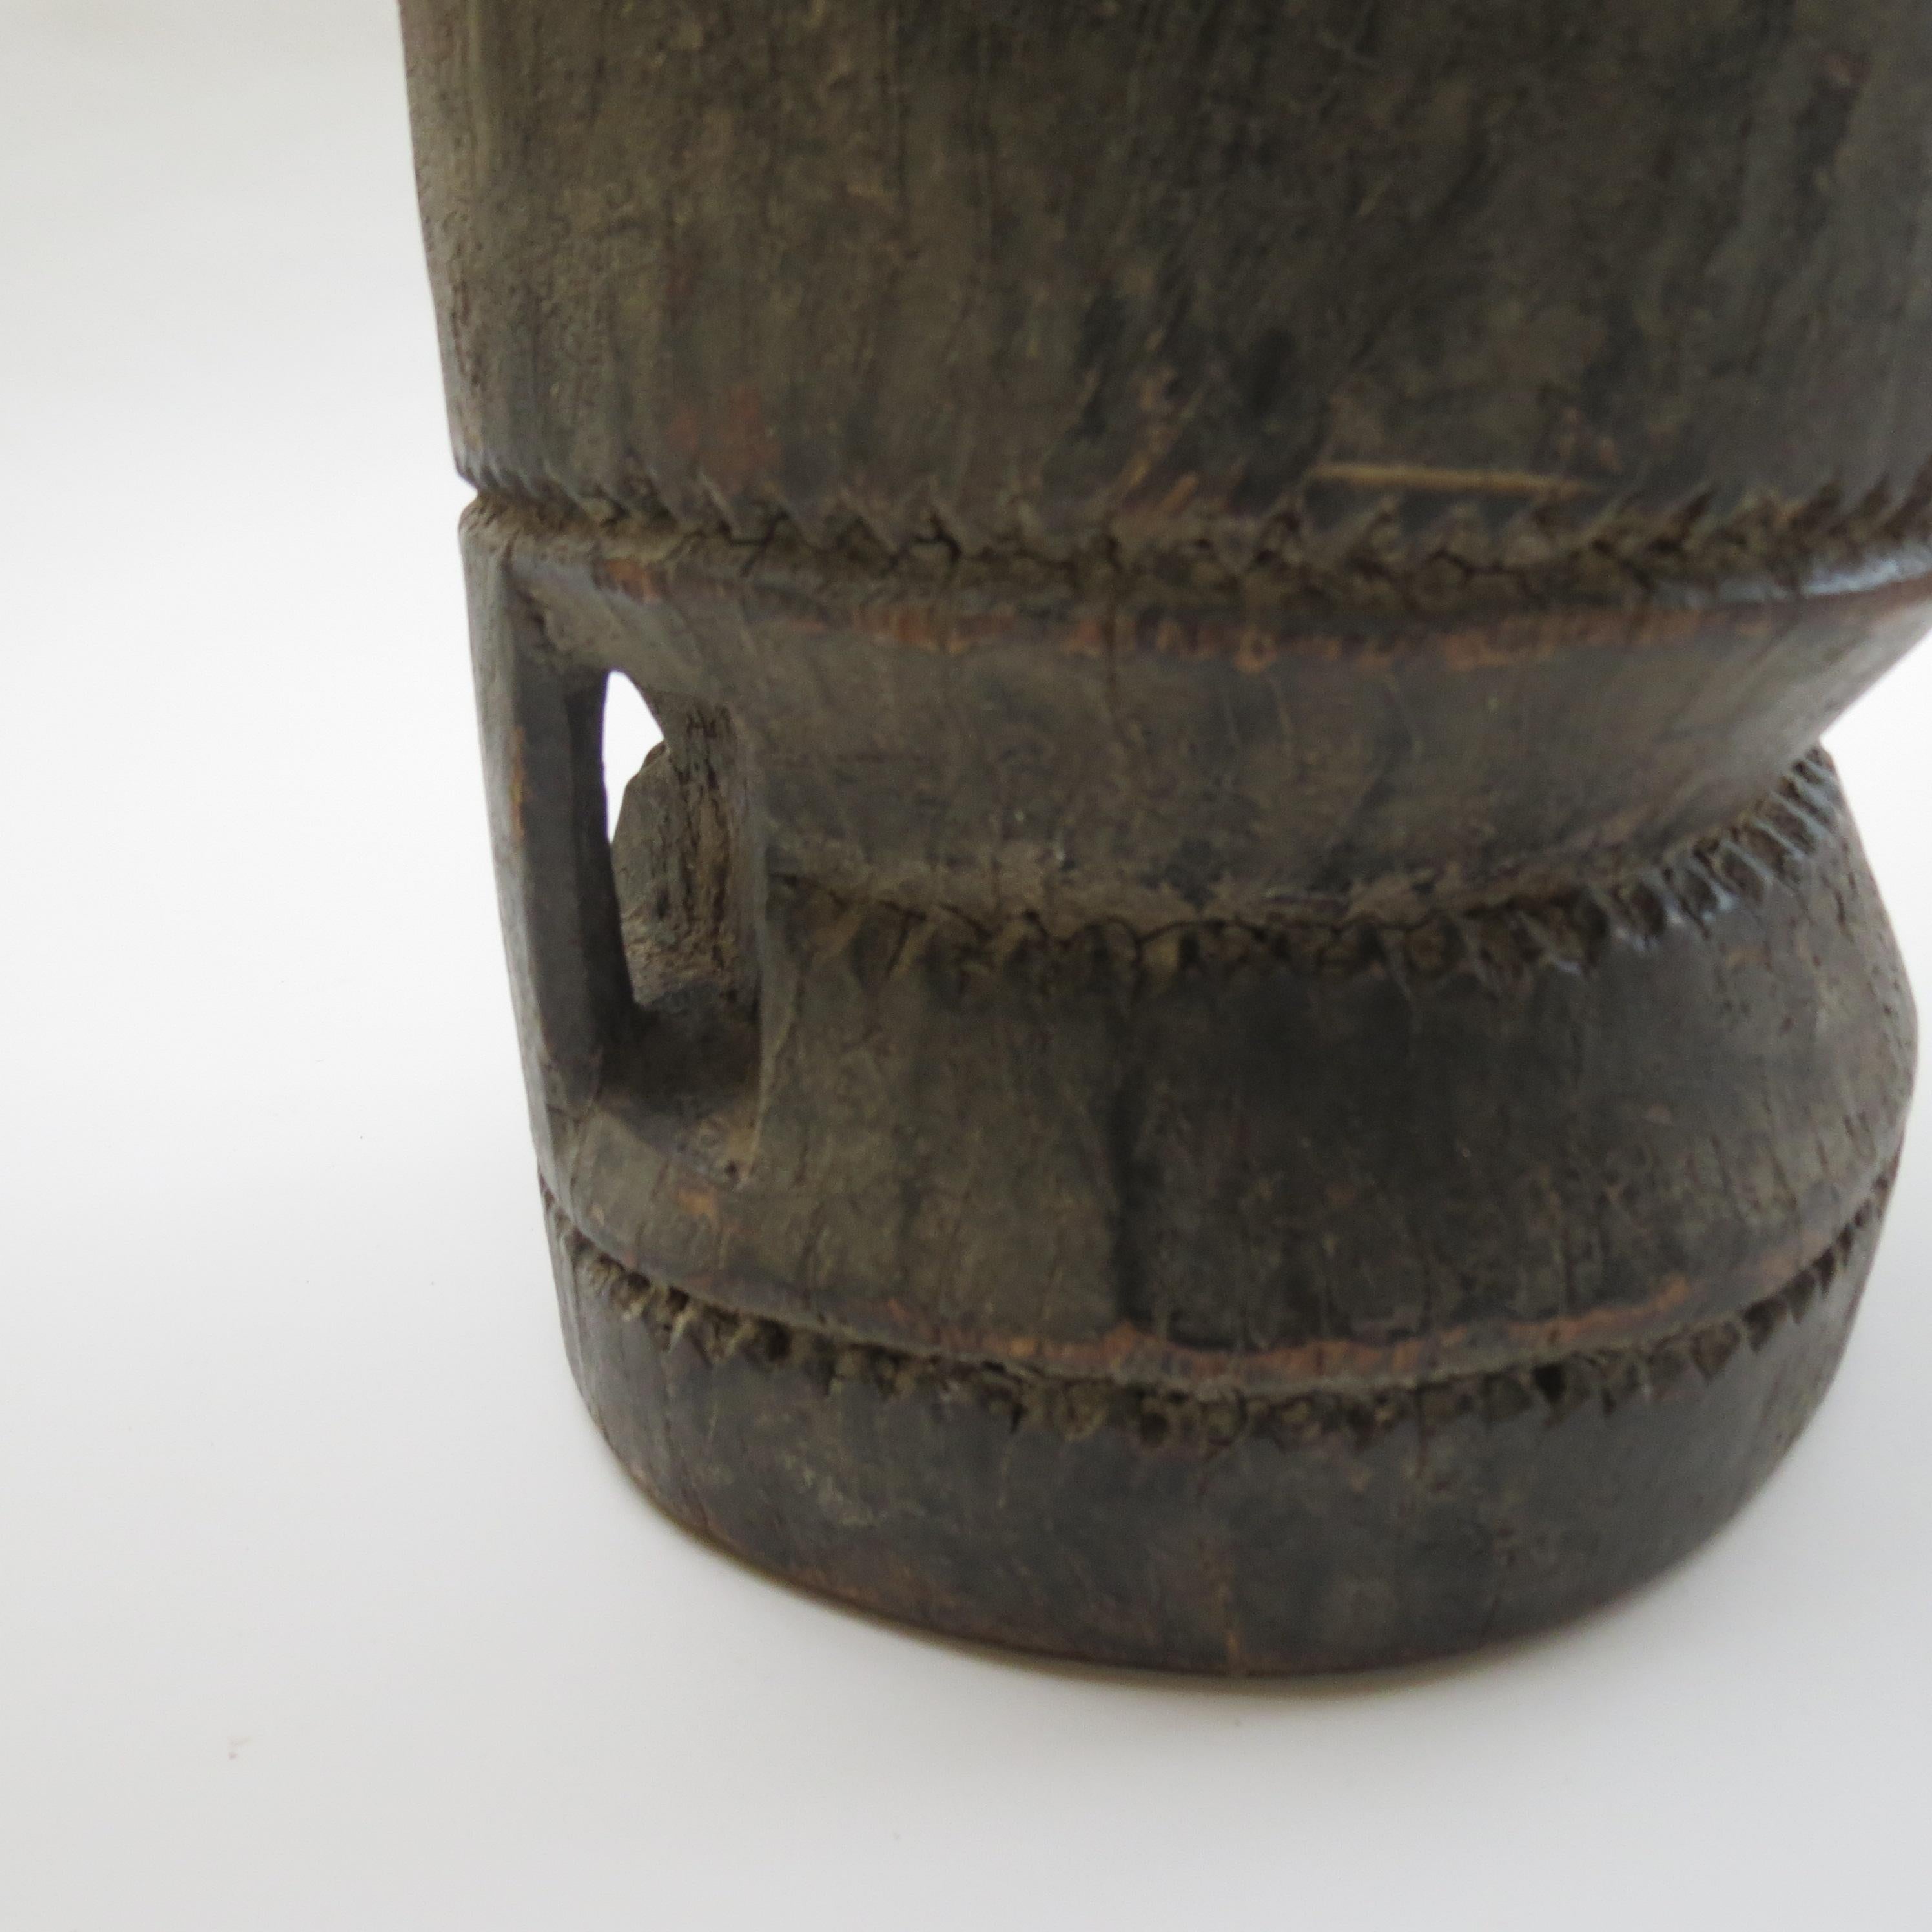 African tribal wooden mortar pot.

Dates from the 20th century, hand carved decoration, very nicely patinated and worn over time.

Could also be used a stool or side table.






 